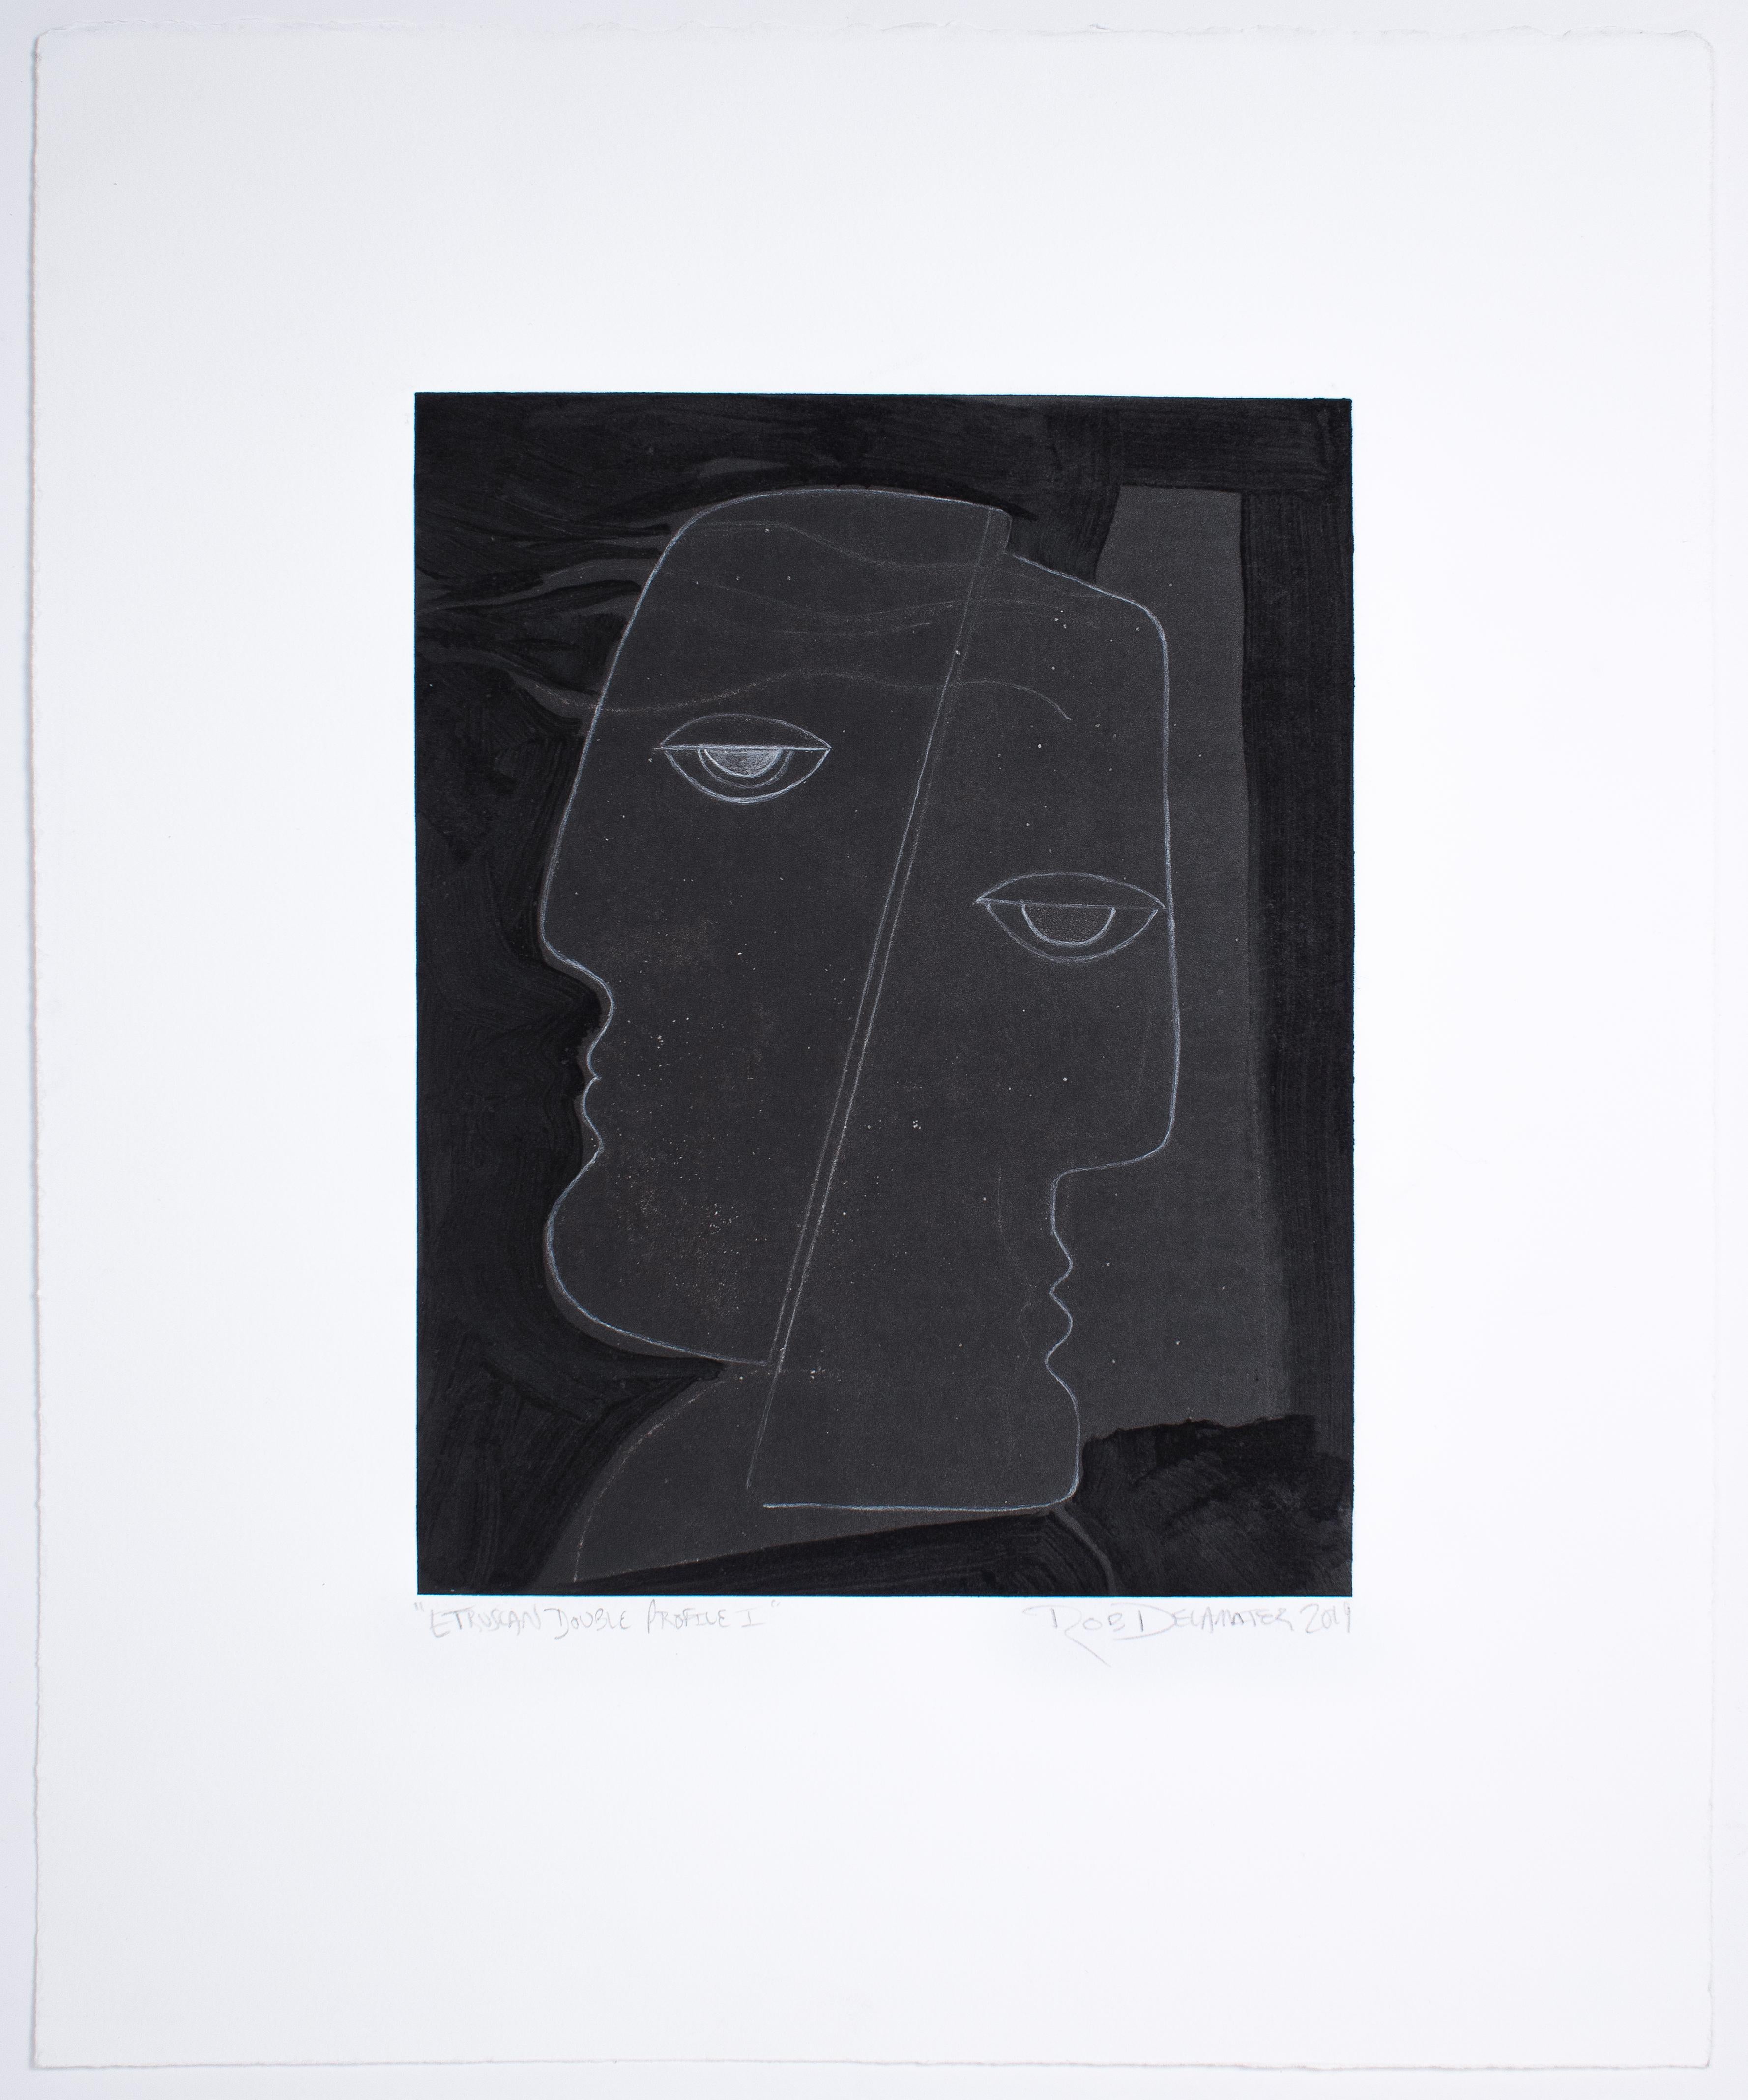 Rob Delamater Abstract Print - "Etruscan Double Profile I" 2019 Monotype